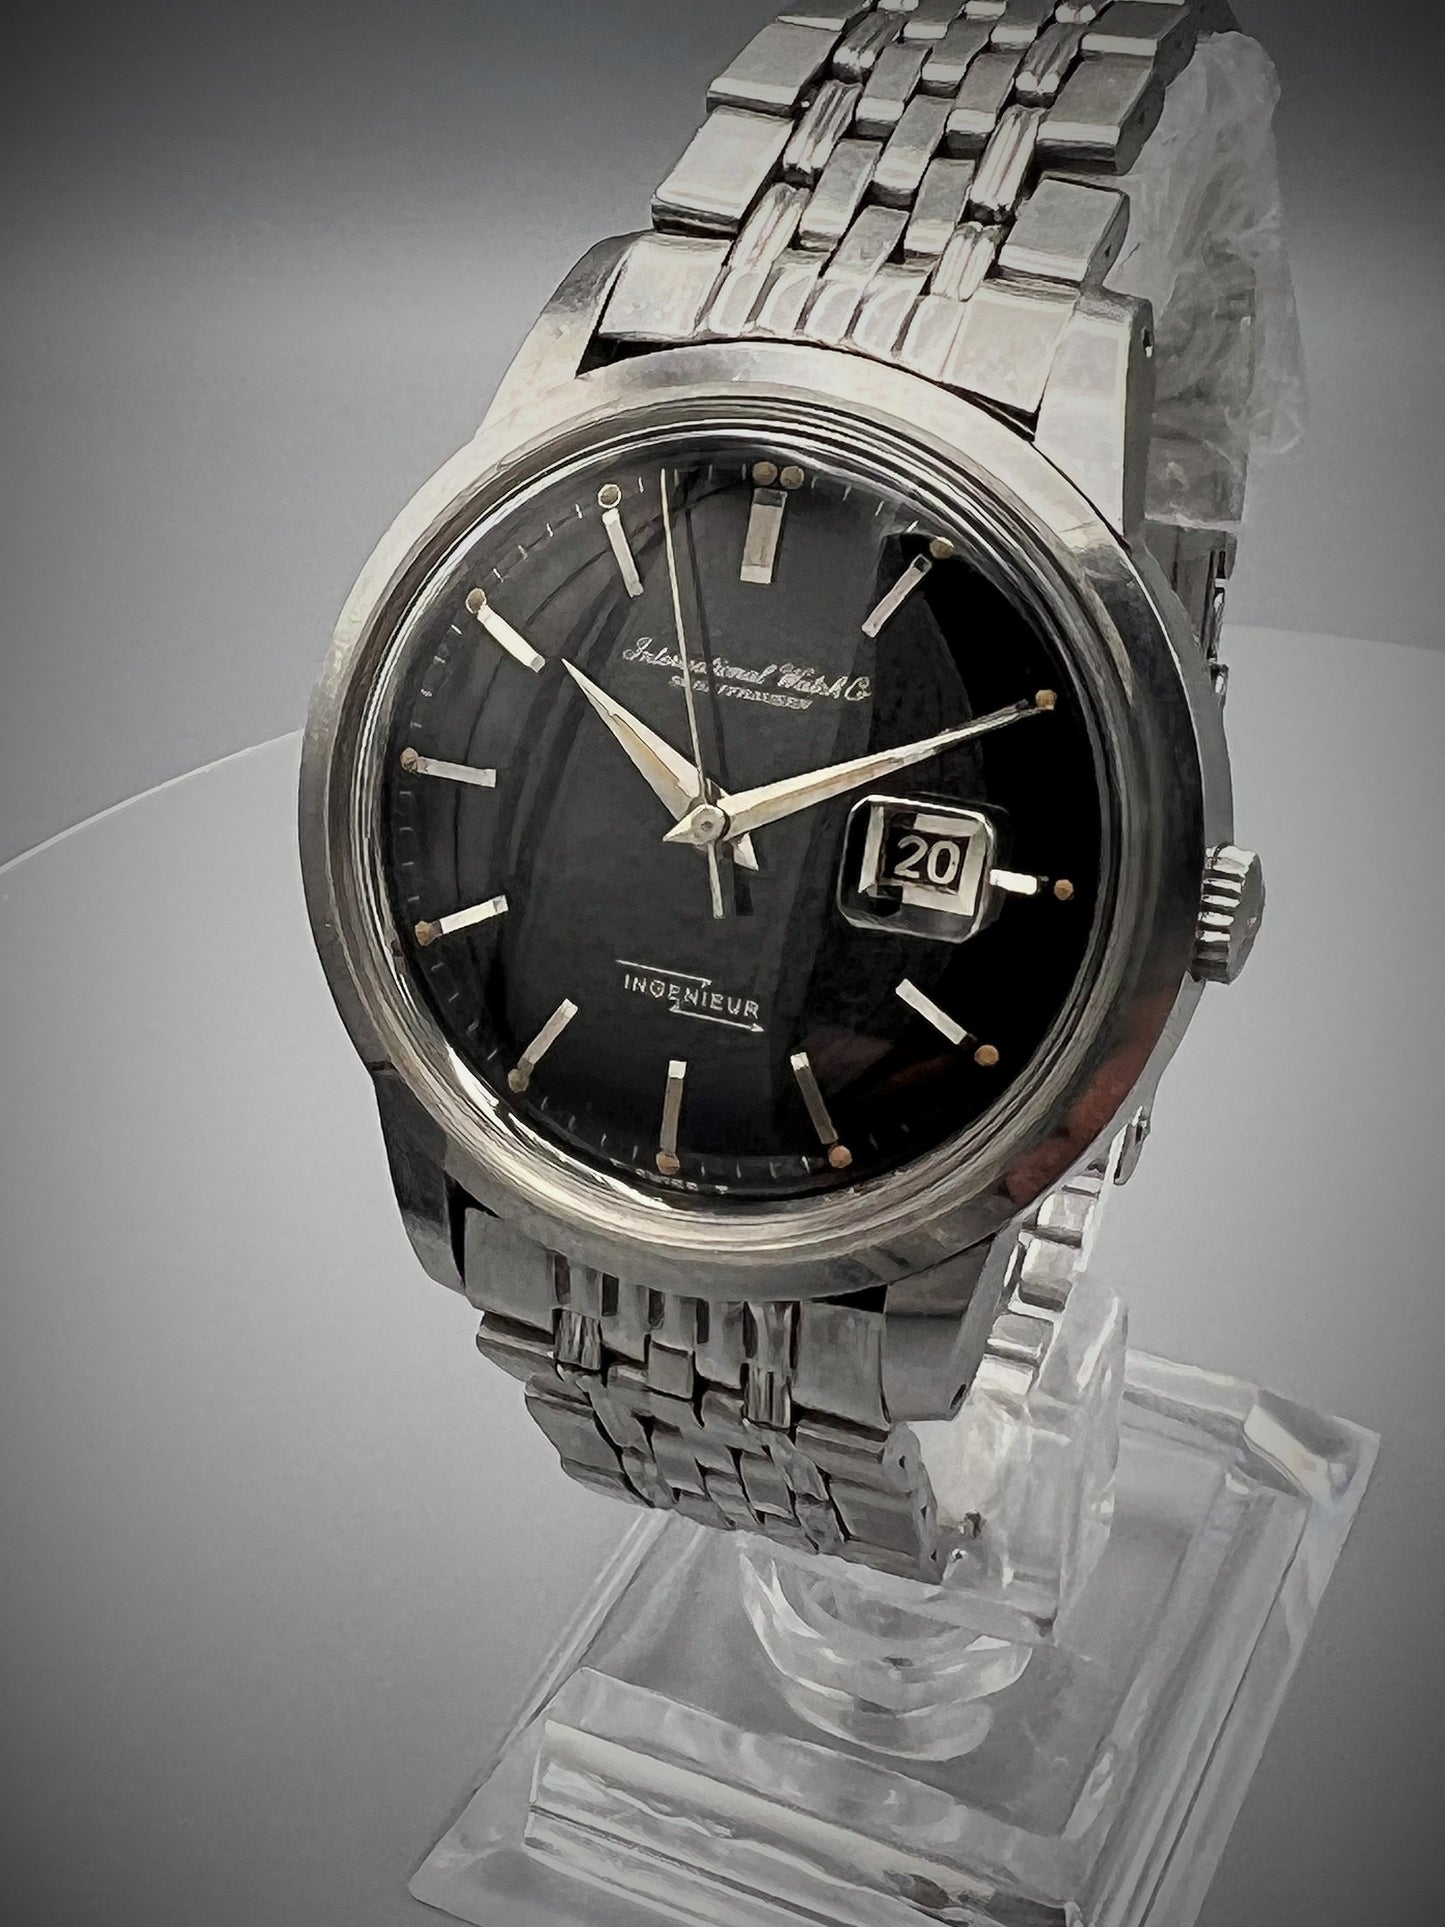 IWC Ingenieur Ref 666, rare stainless steel amagnetic watch with glossy gilt dial, blackout date, 1960